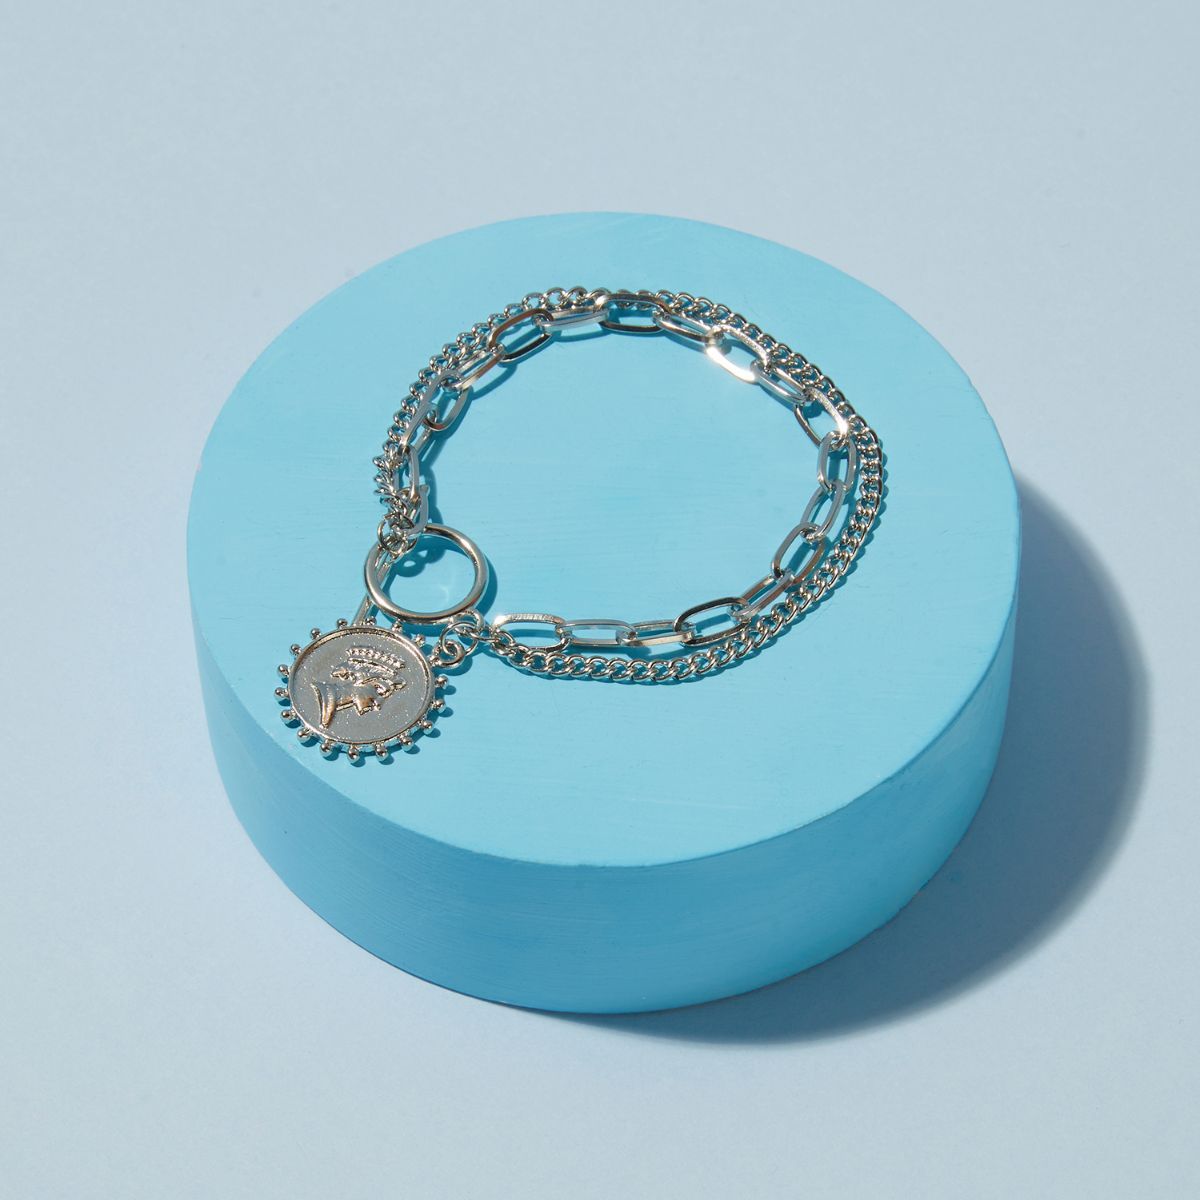 Water pearl bracelet with bee coin charm – Karine Sultan